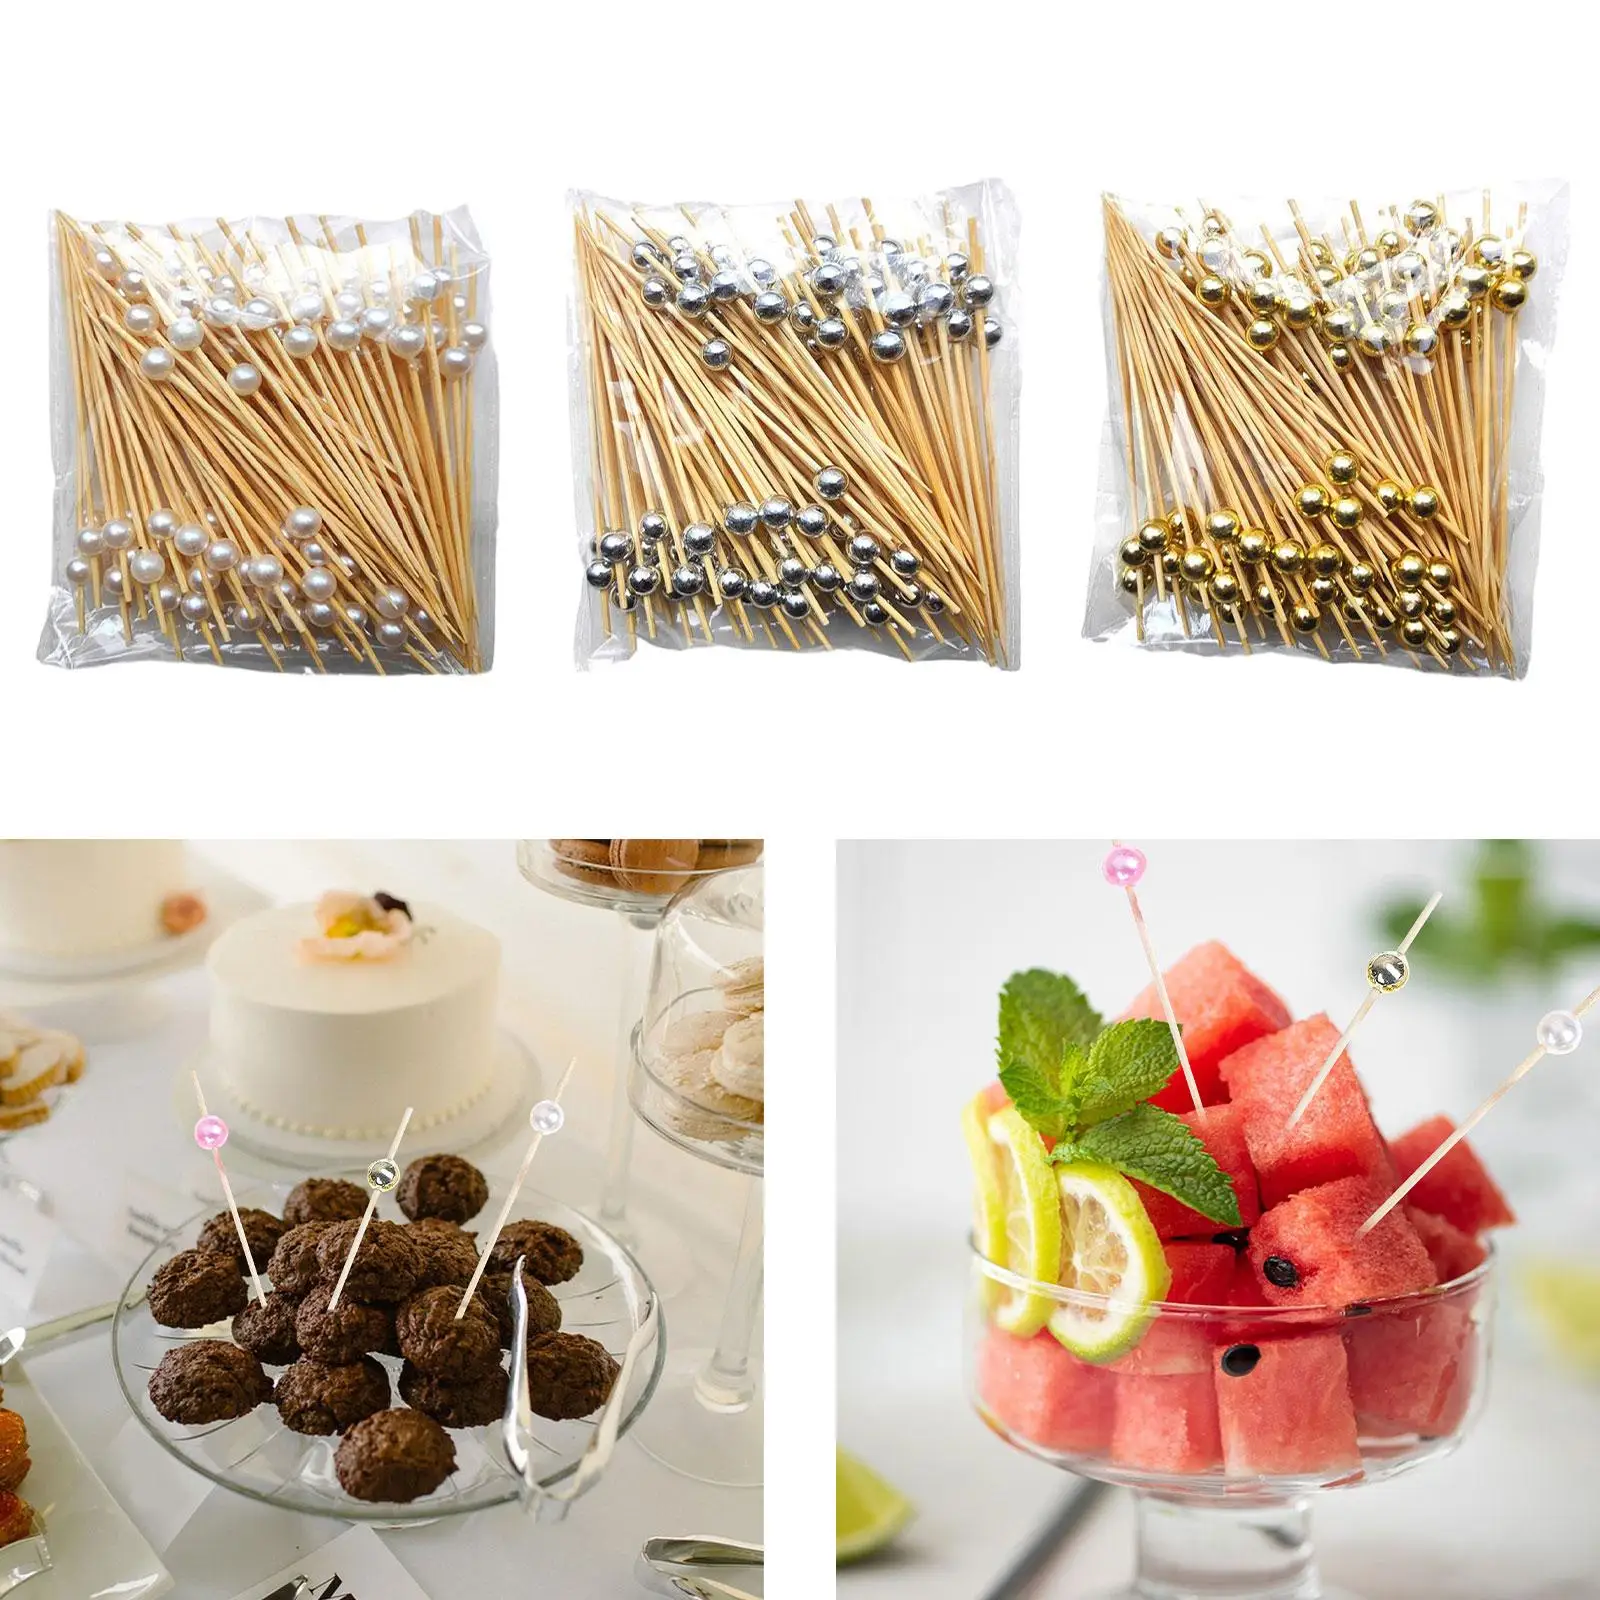 300Pcs Fruit Forks Snack Pearl Cocktail Sticks Fruit Kabobs for Sandwich Wedding Appetizer Pastry Birthday Themed Party